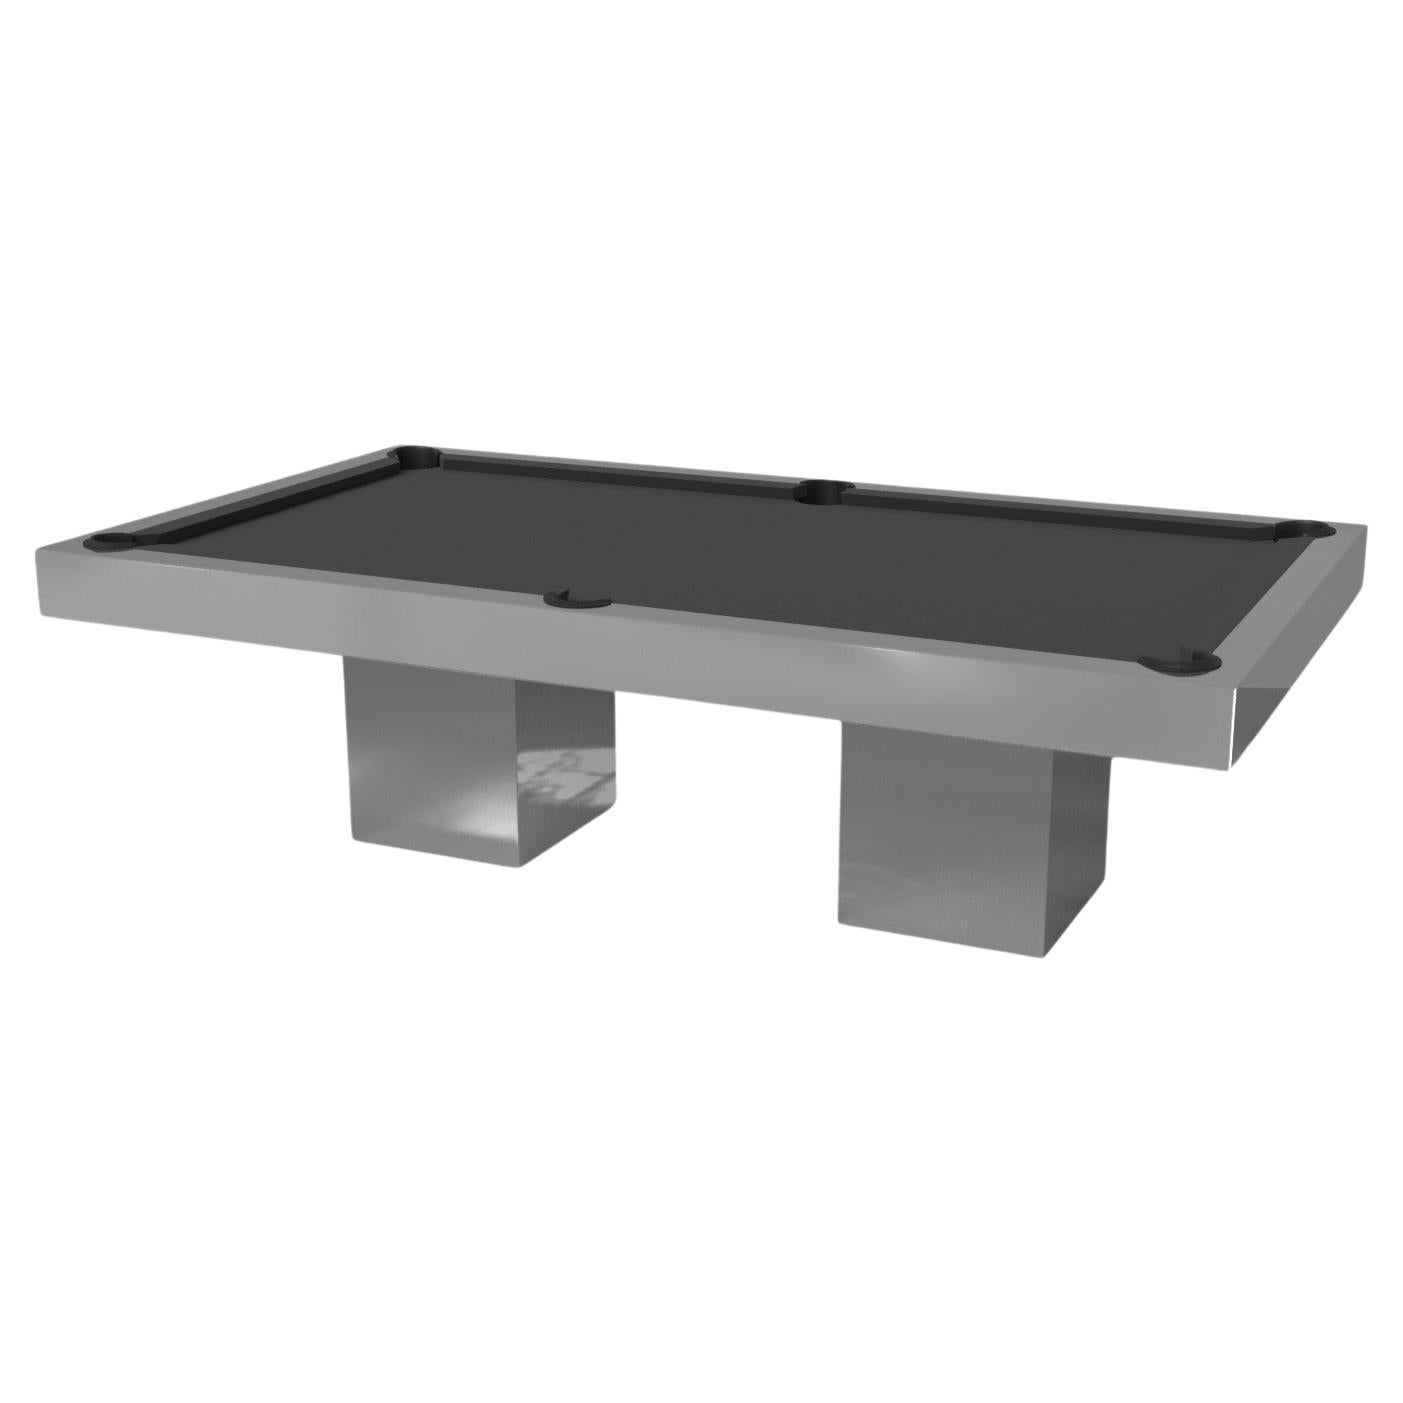 Elevate Customs Trestle Pool Table / Stainless Steel Metal in 8.5' - Made in USA For Sale